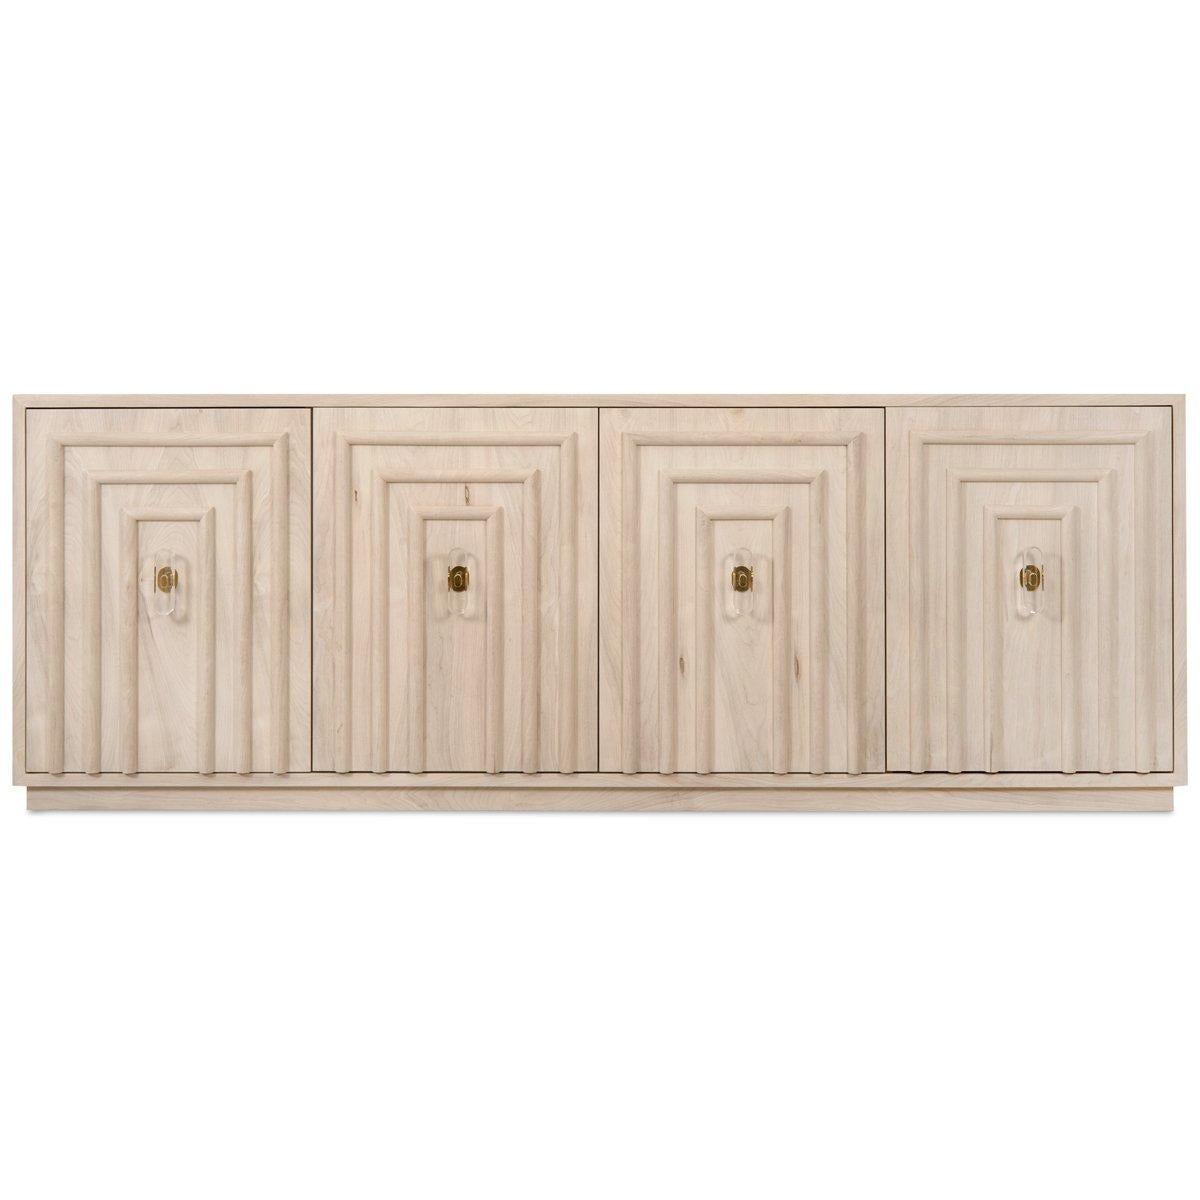 Elegant and symmetrical, the Art Deco Credenza is a modern twist on the classic art deco styling. It's 4 square trellis doors and bleached walnut finish make this piece classic and stunning. The Lucite and brass oval hardware pulls add a modern